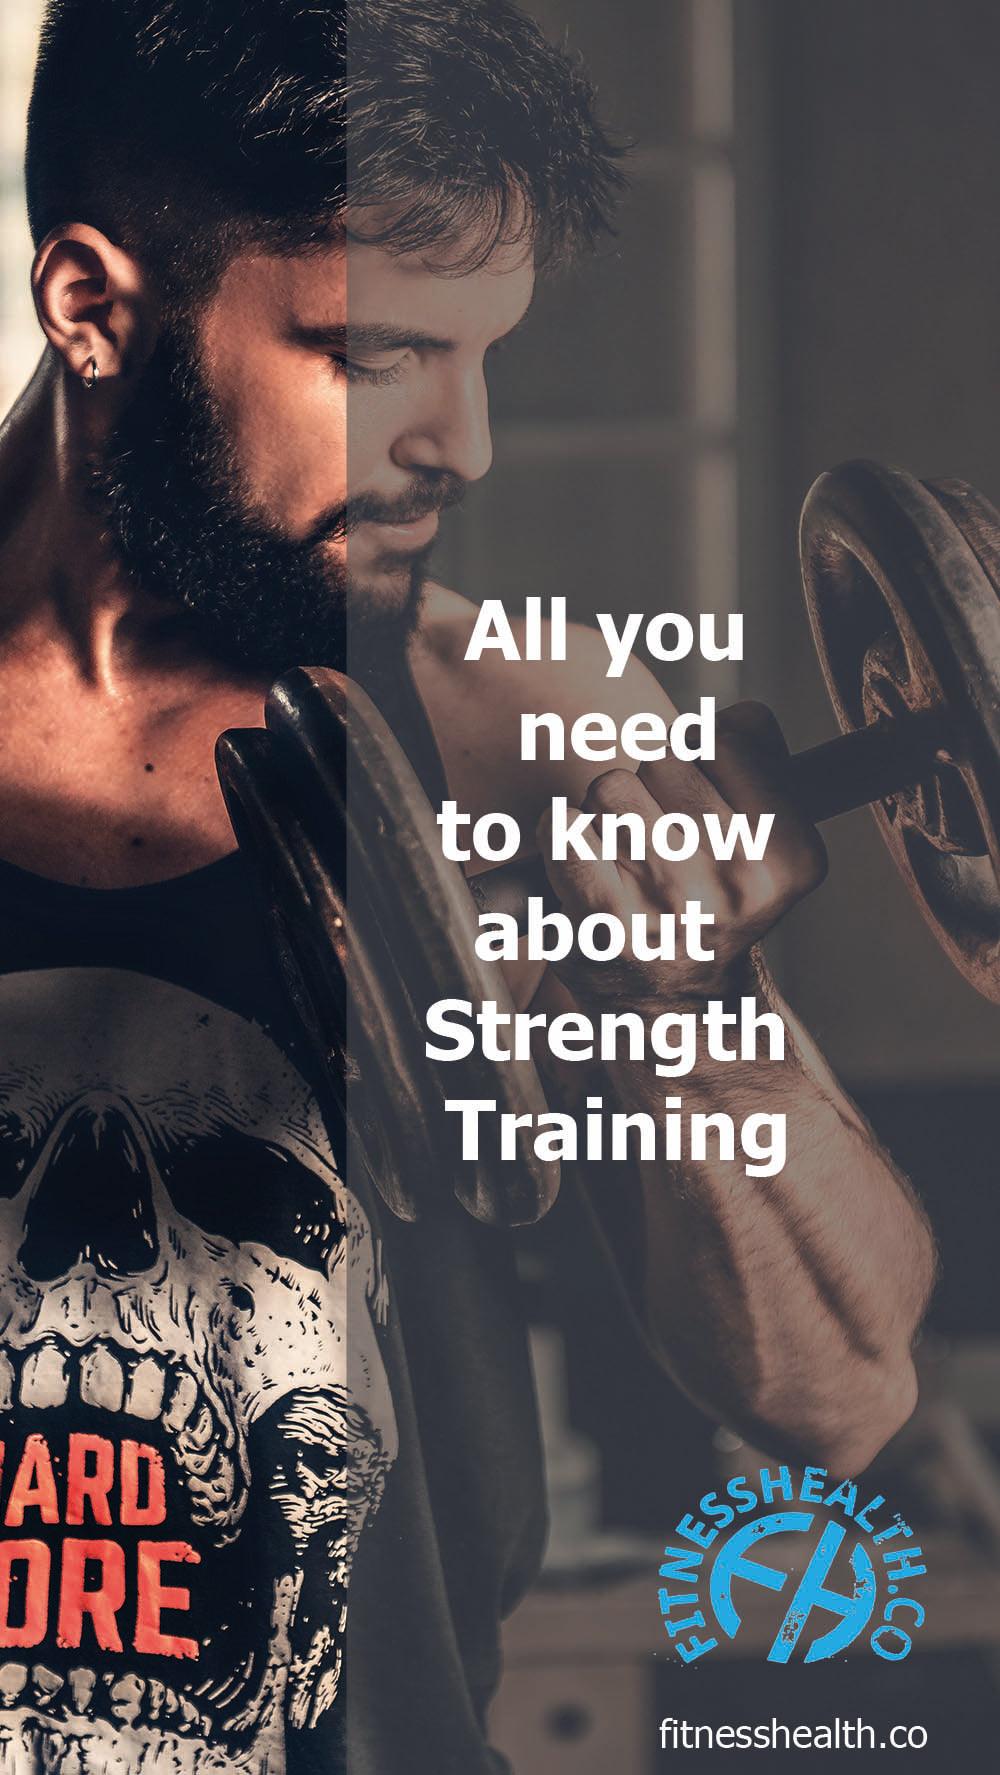 All you need to know about Strength Training - Fitness Health 